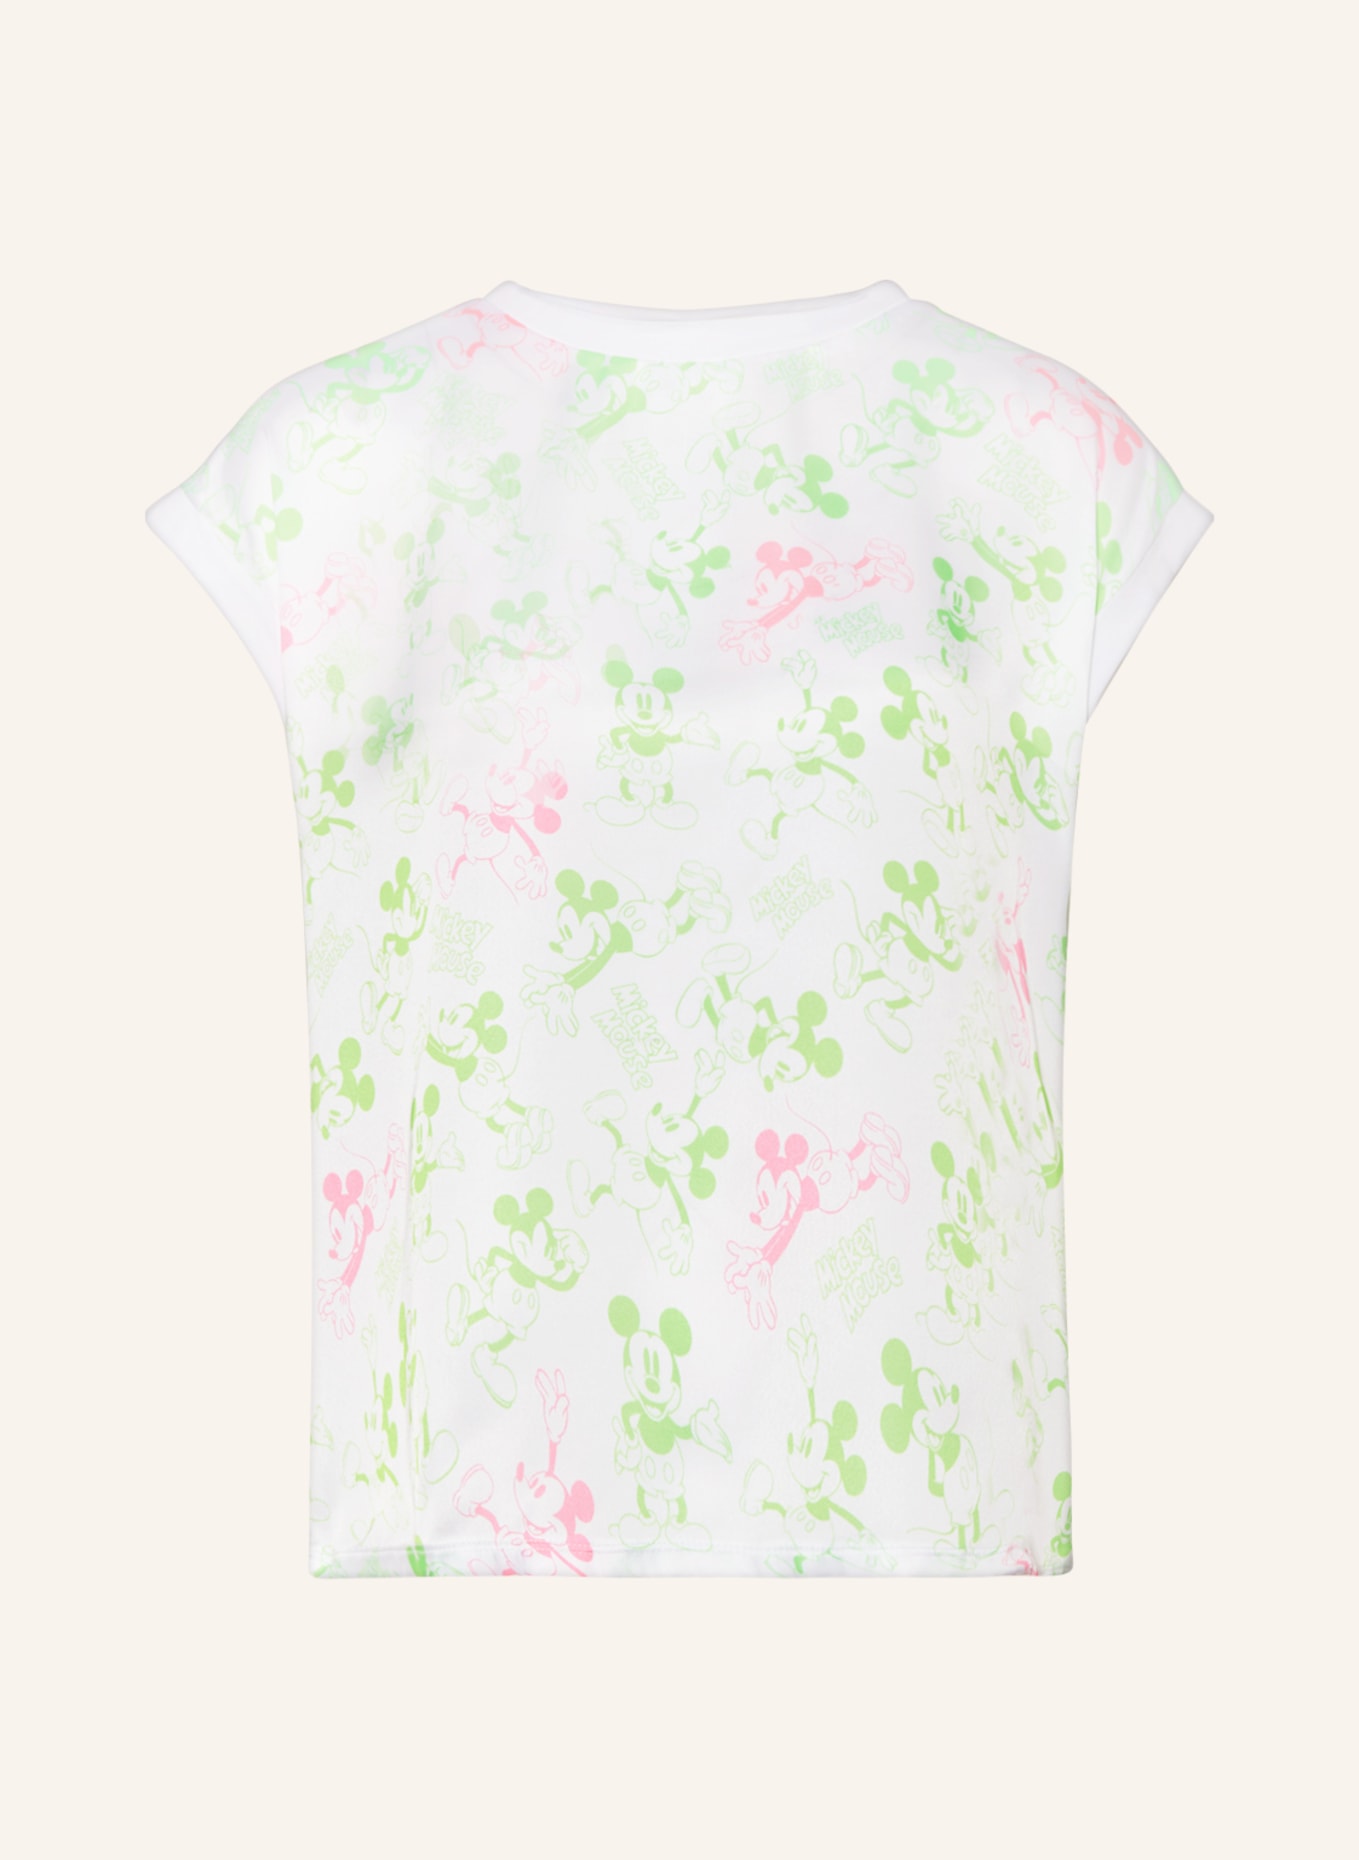 Princess GOES HOLLYWOOD T-shirt in mixed materials, Color: WHITE/ NEON GREEN/ NEON PINK (Image 1)